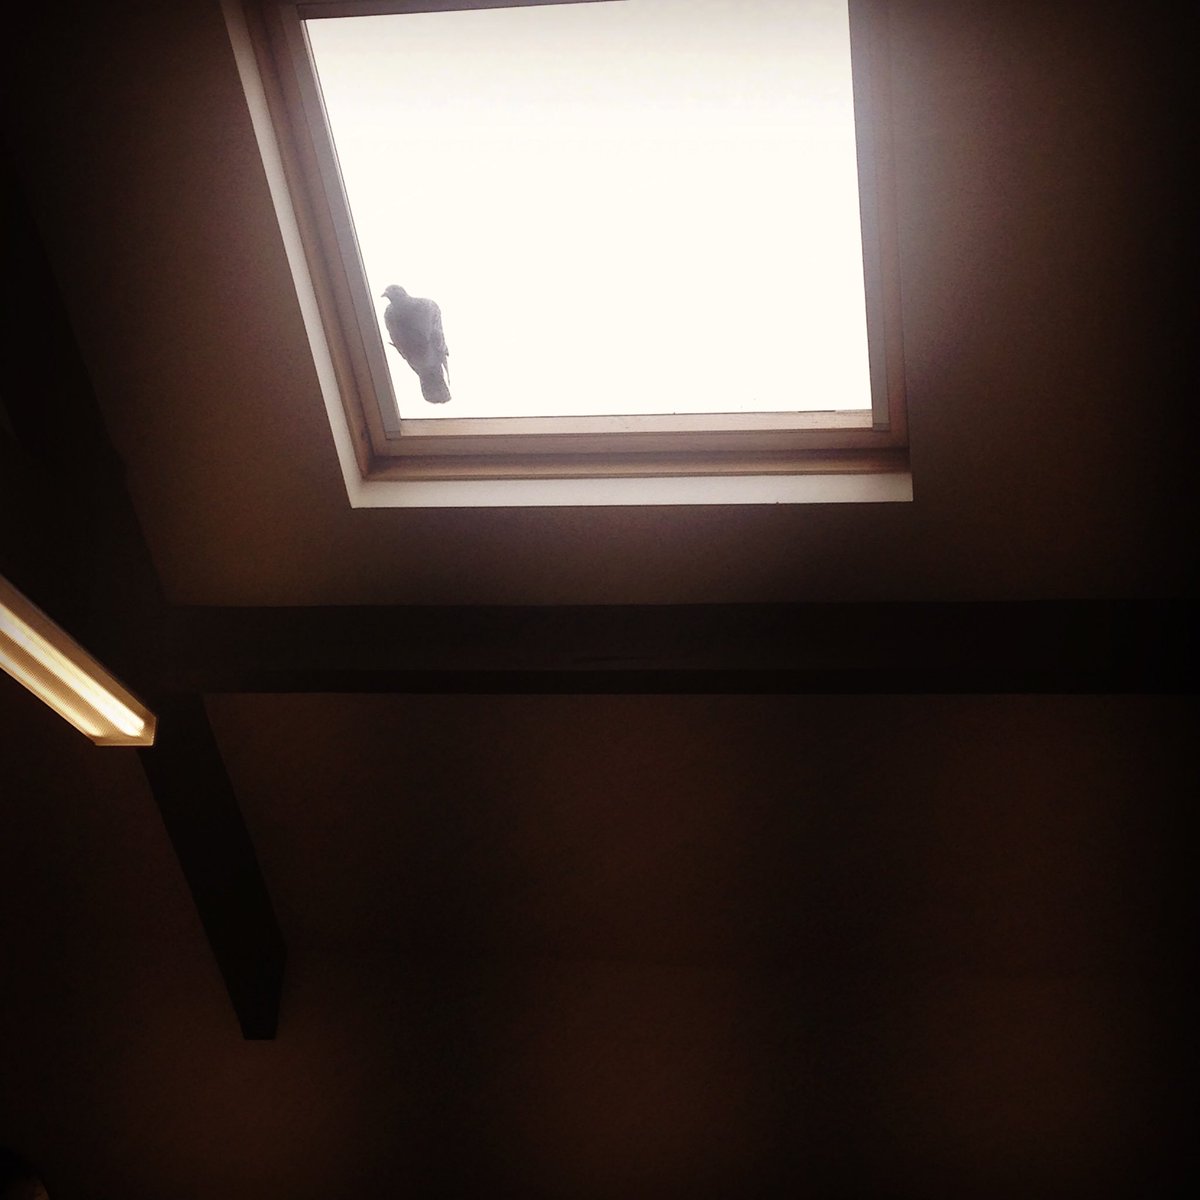 Pigeon trying to break into the Hub office again! #persistent #officeentertainment